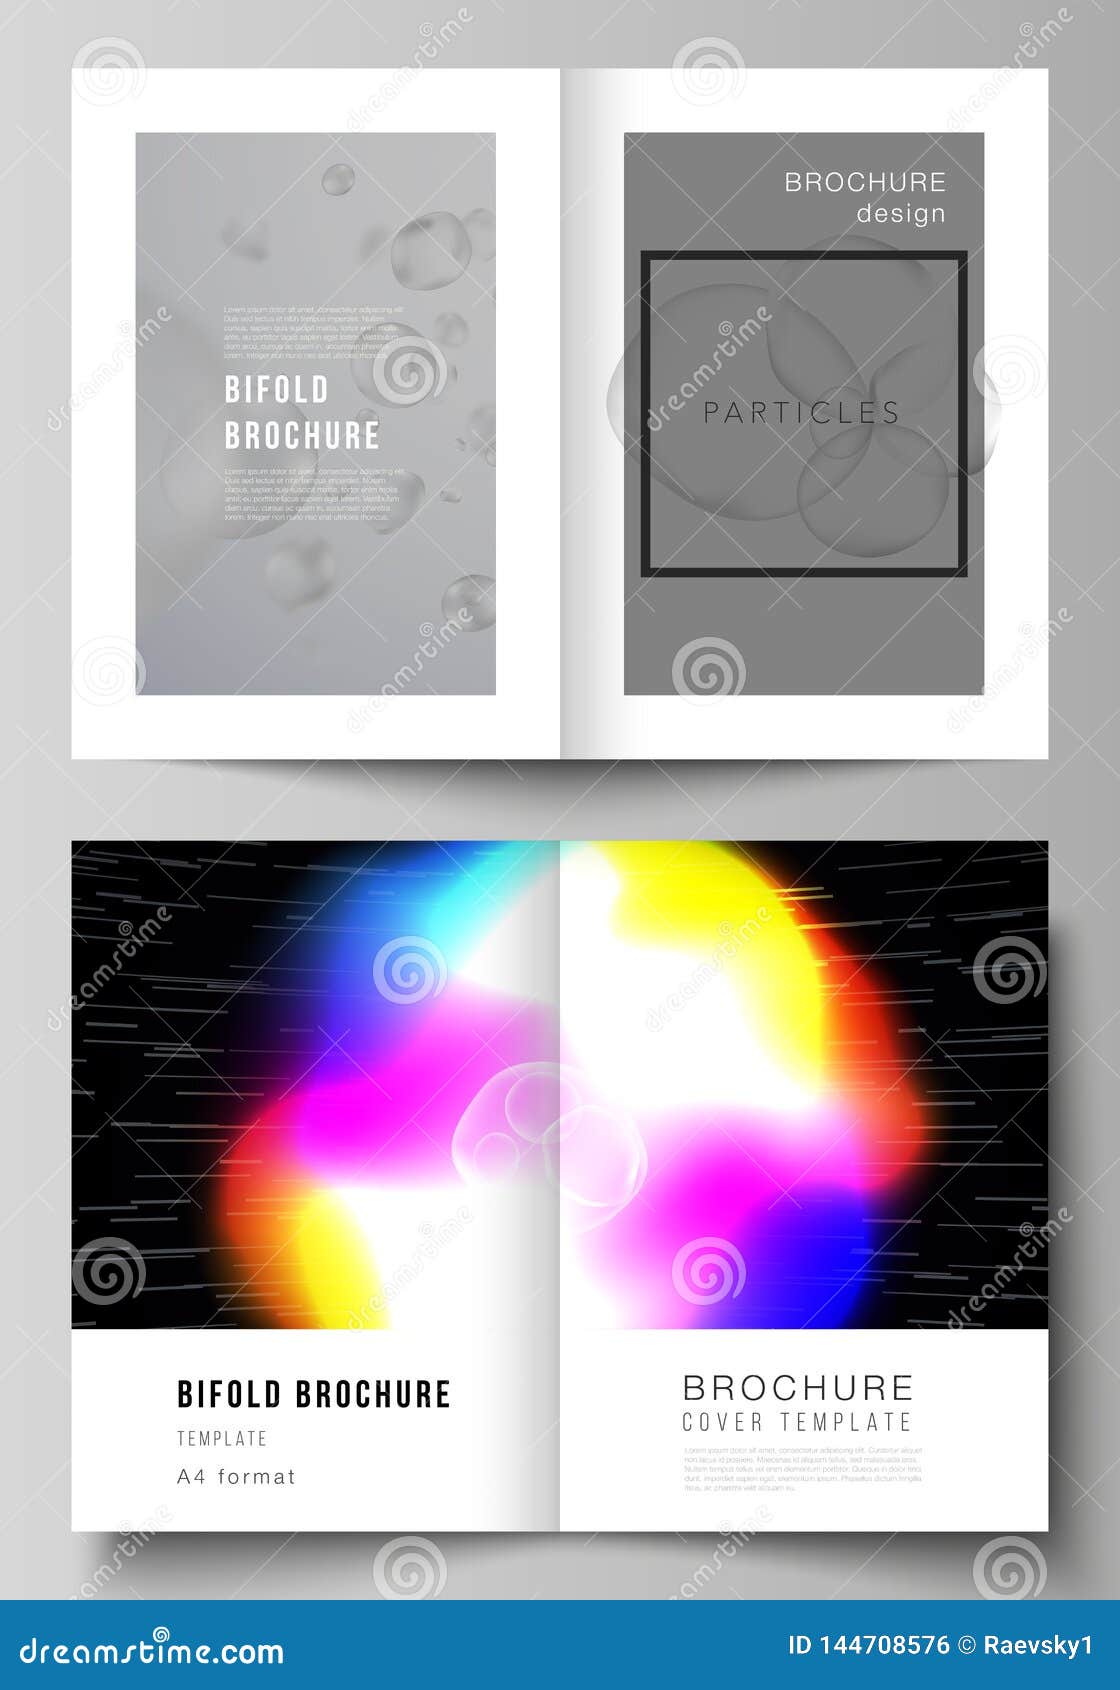 Download Vector Layout Of Two A4 Format Cover Mockups Design Templates For Bifold Brochure, Flyer, Report ...